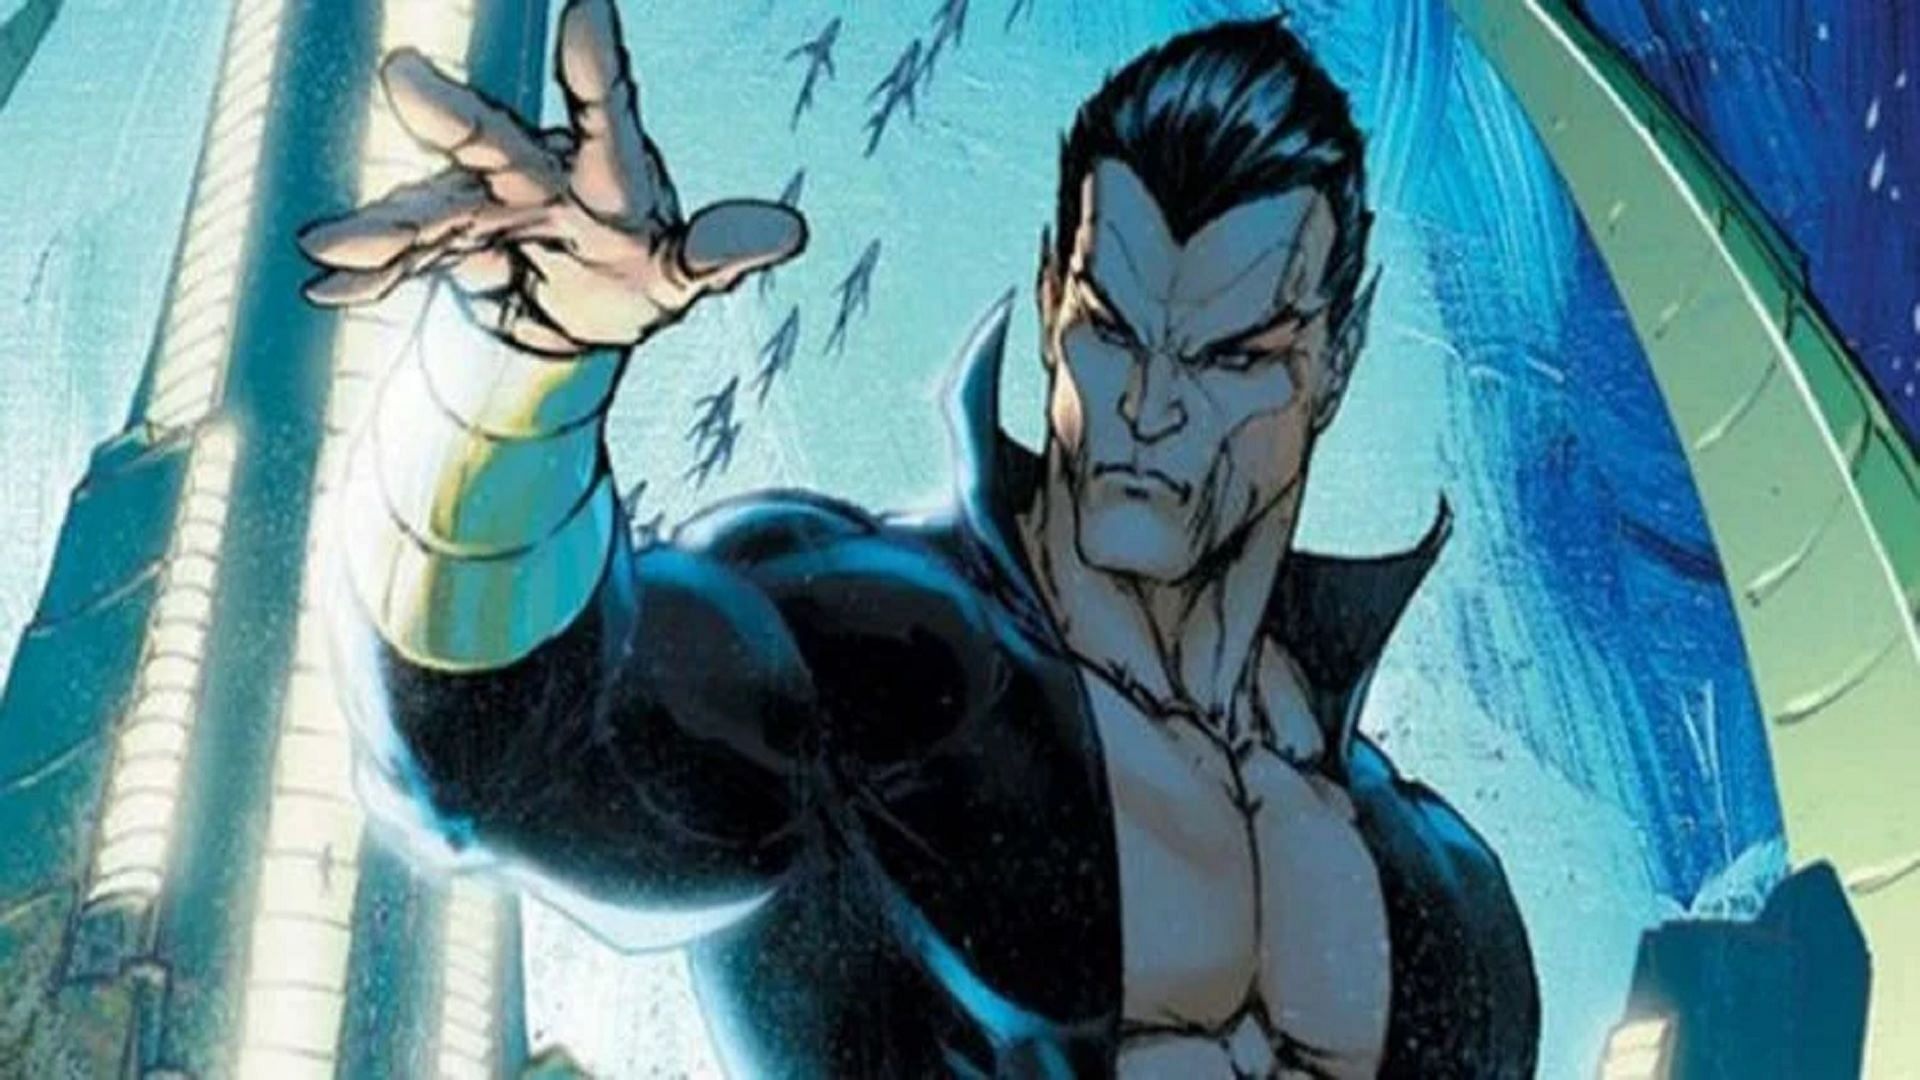 What is known about Namor's rumored appearance in Black Panther 2